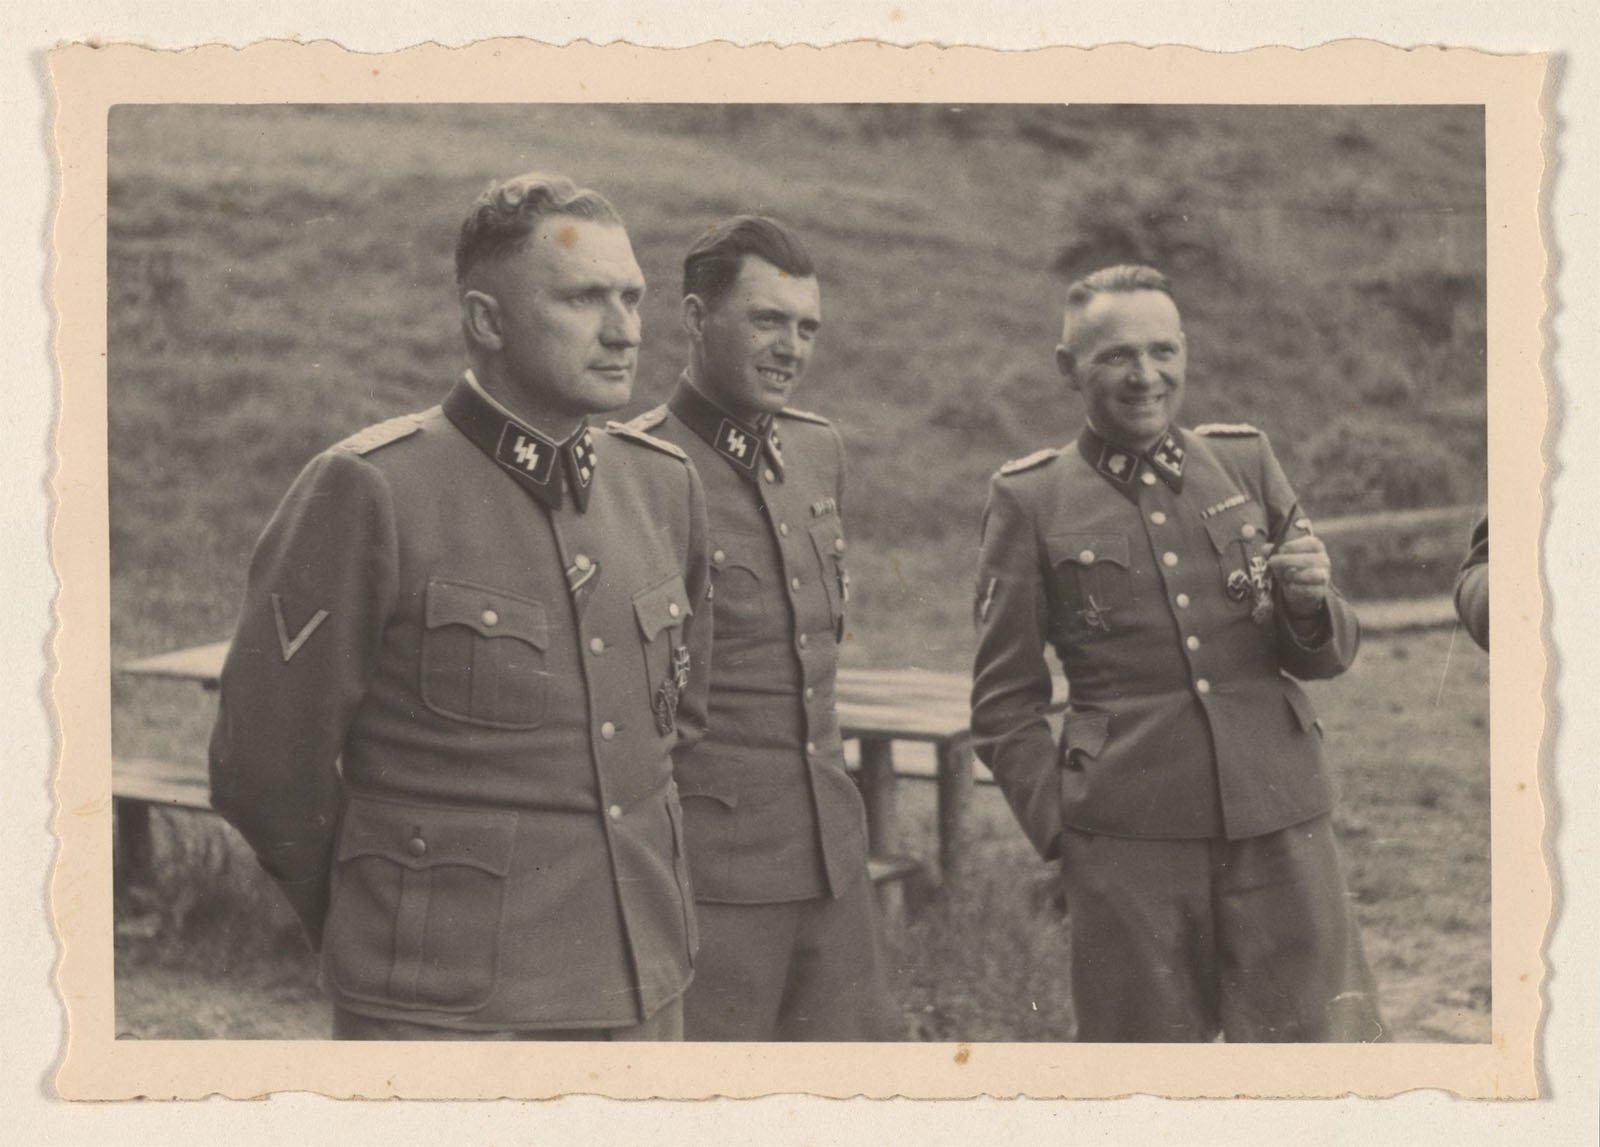 A black-and-white photo shows three men in military uniforms standing outdoors. The man on the left looks ahead with hands behind his back. The middle man and right man, smiling, are engaged in conversation. An outdoor setting with a table is visible in the background.